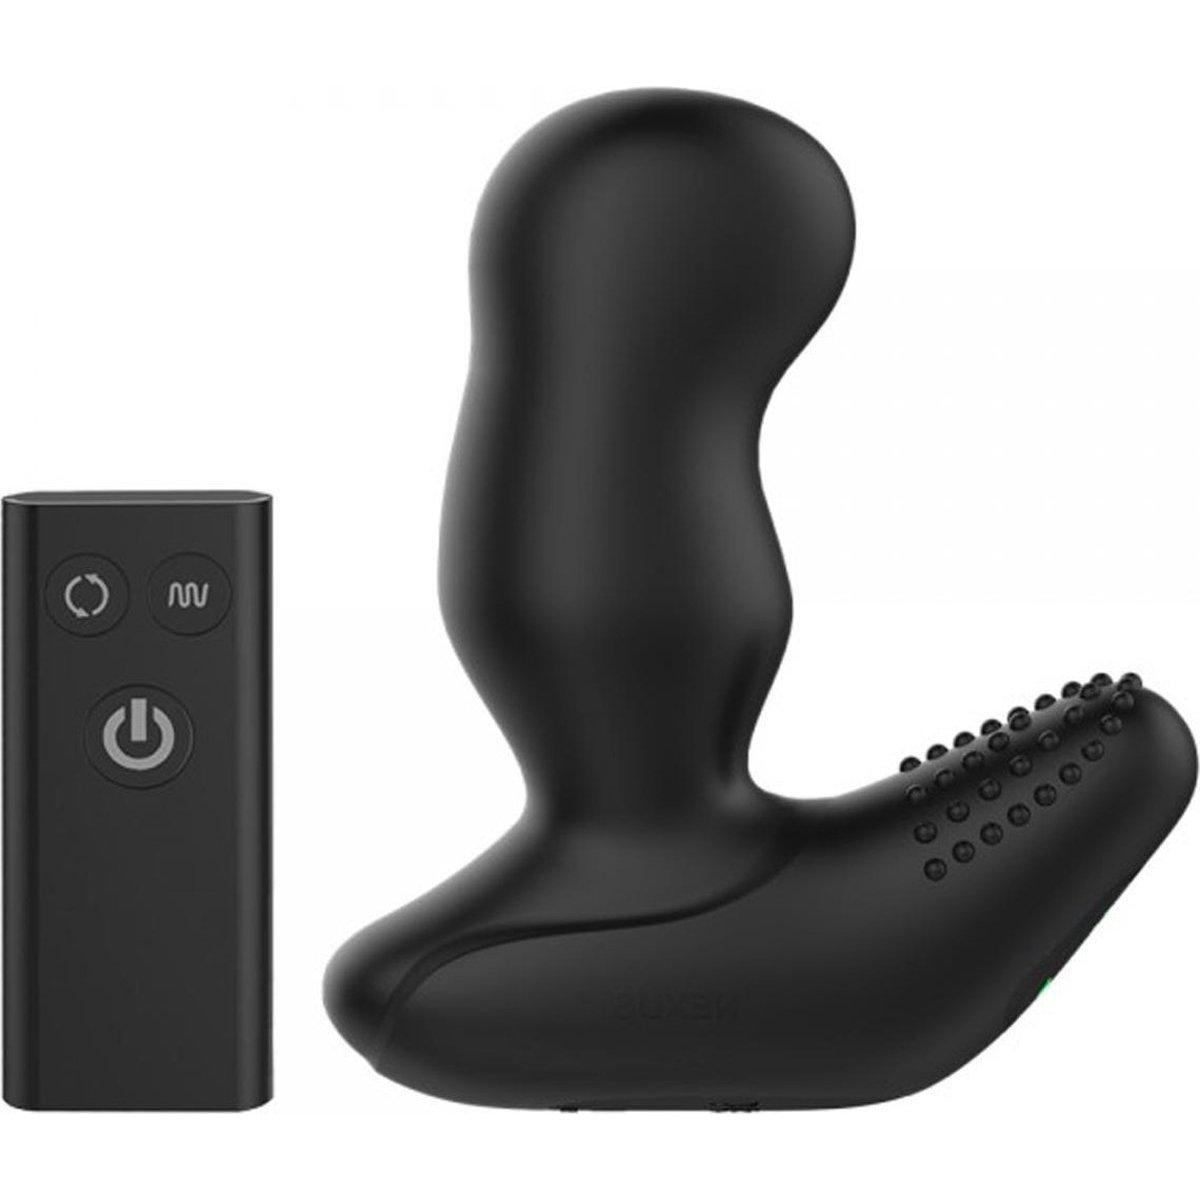 Nexus Revo Extreme Rechargeable Rotating Prostate Massager